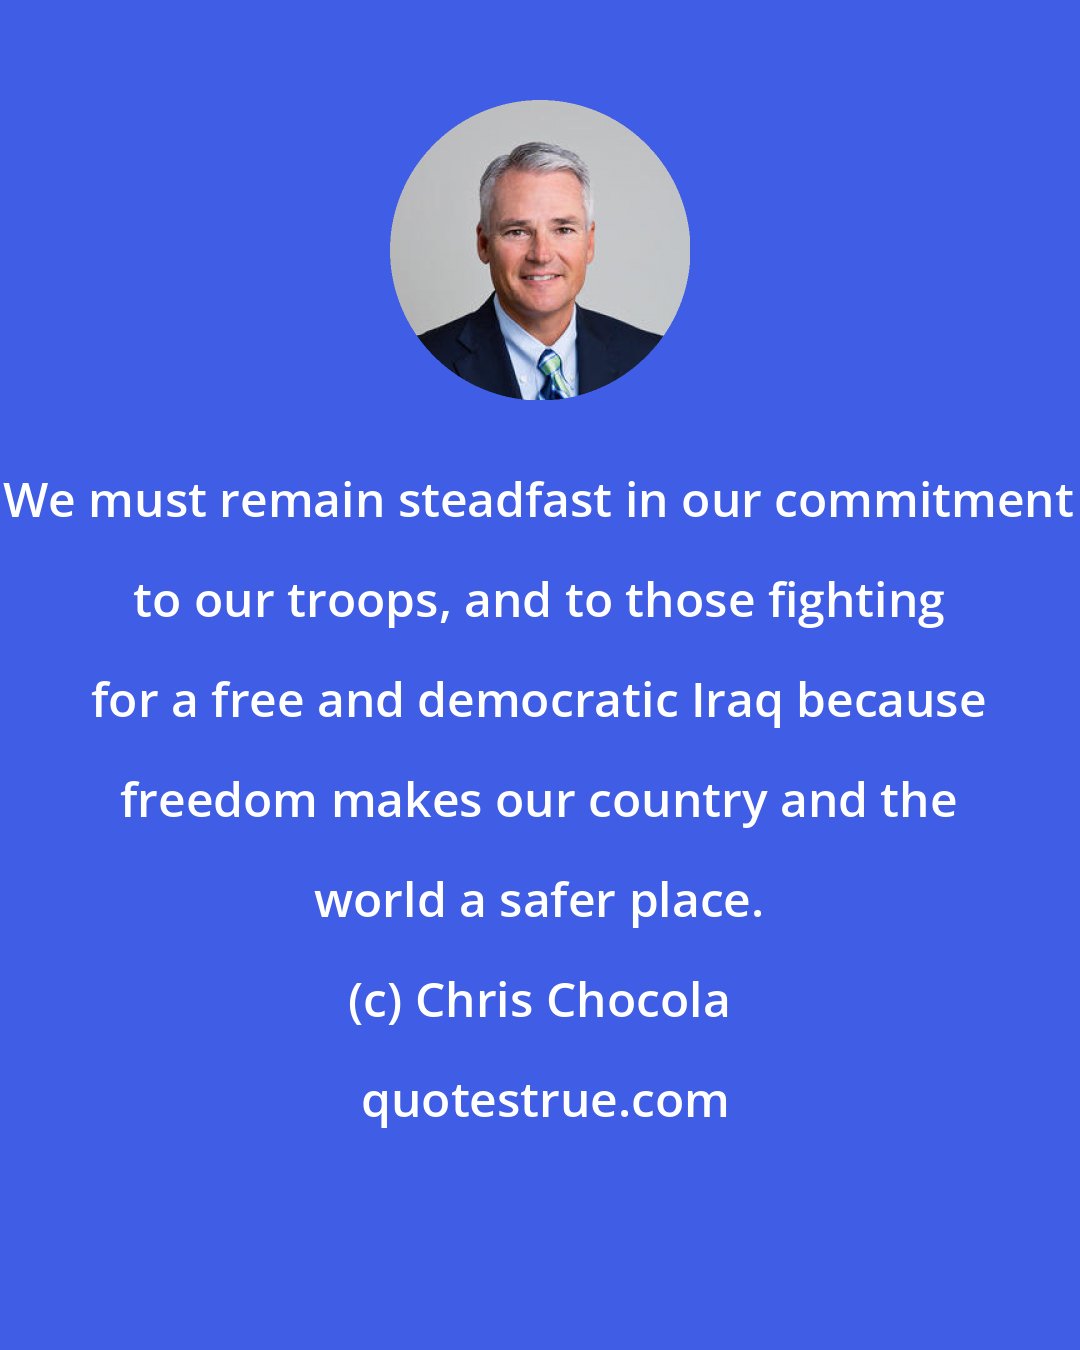 Chris Chocola: We must remain steadfast in our commitment to our troops, and to those fighting for a free and democratic Iraq because freedom makes our country and the world a safer place.